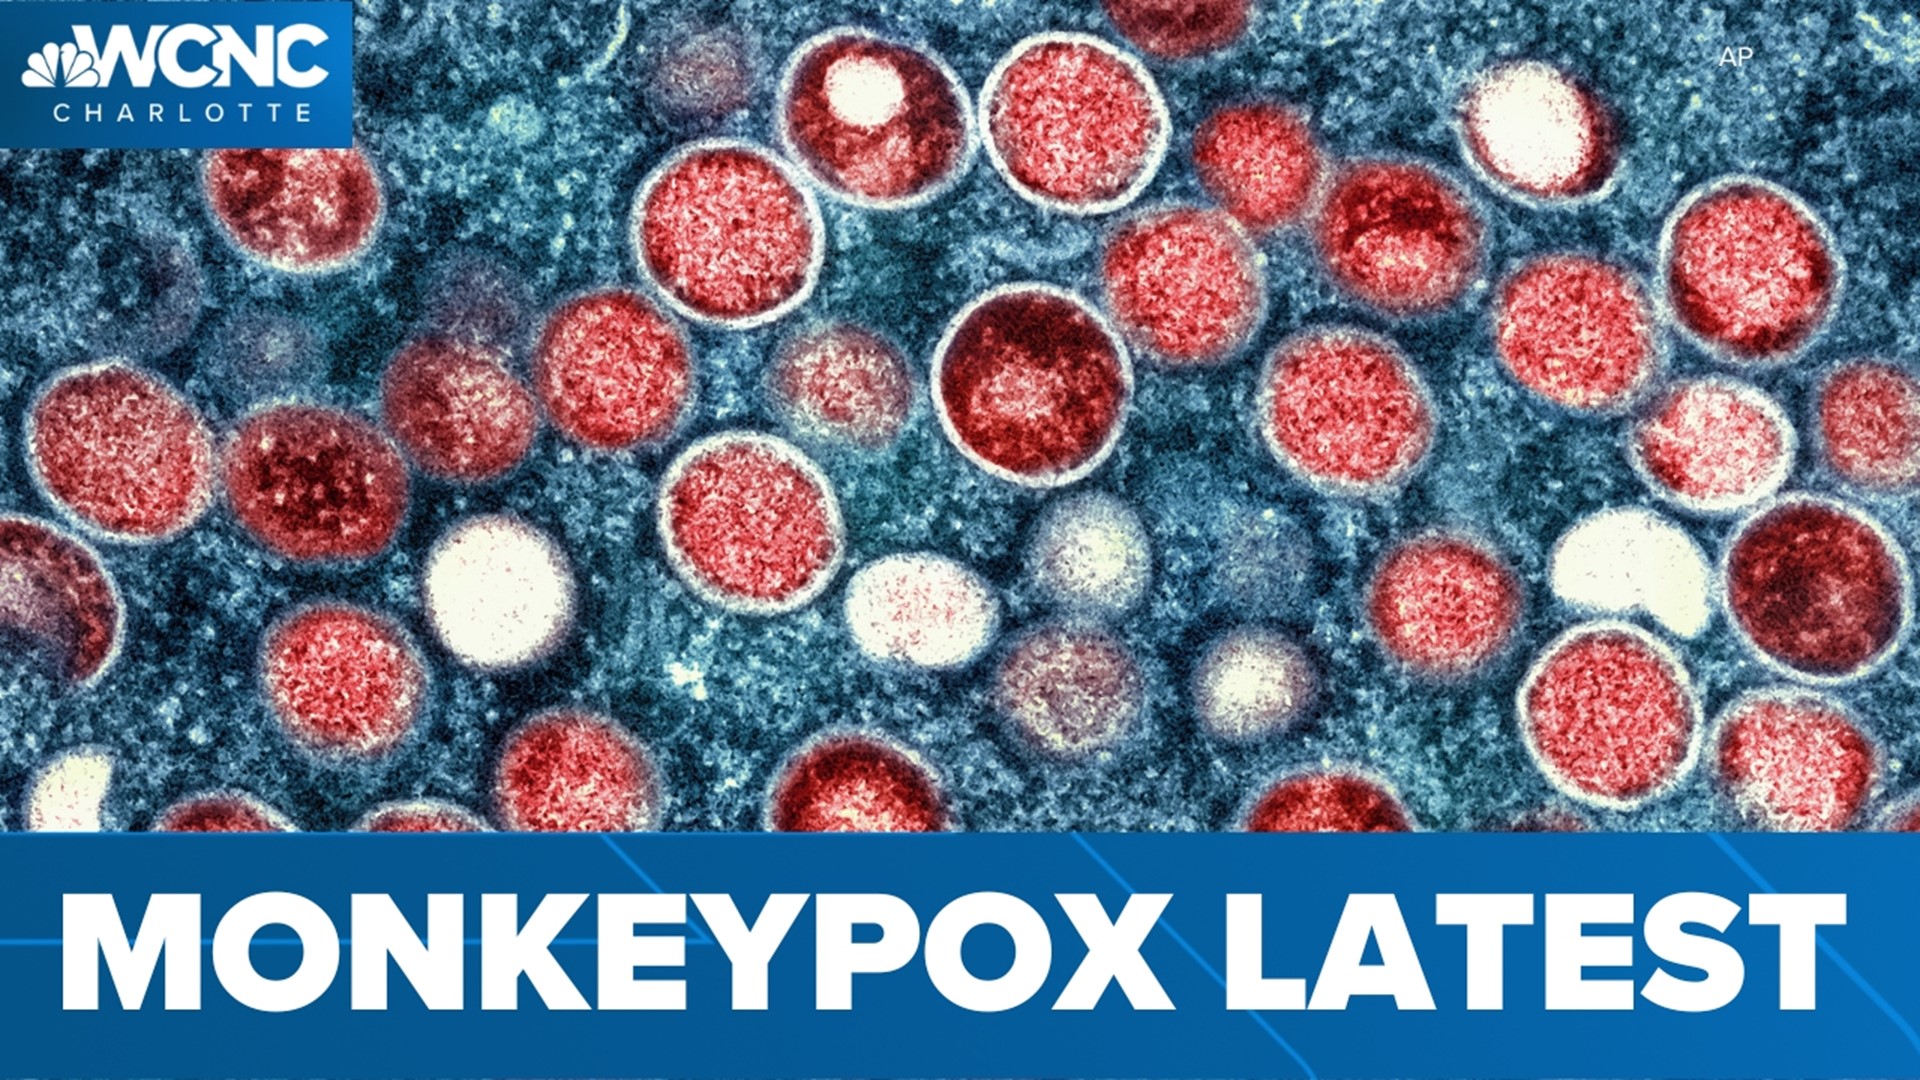 The U.S. is now declaring Monkeypox a public health emergency as more cases are being reported across the country.